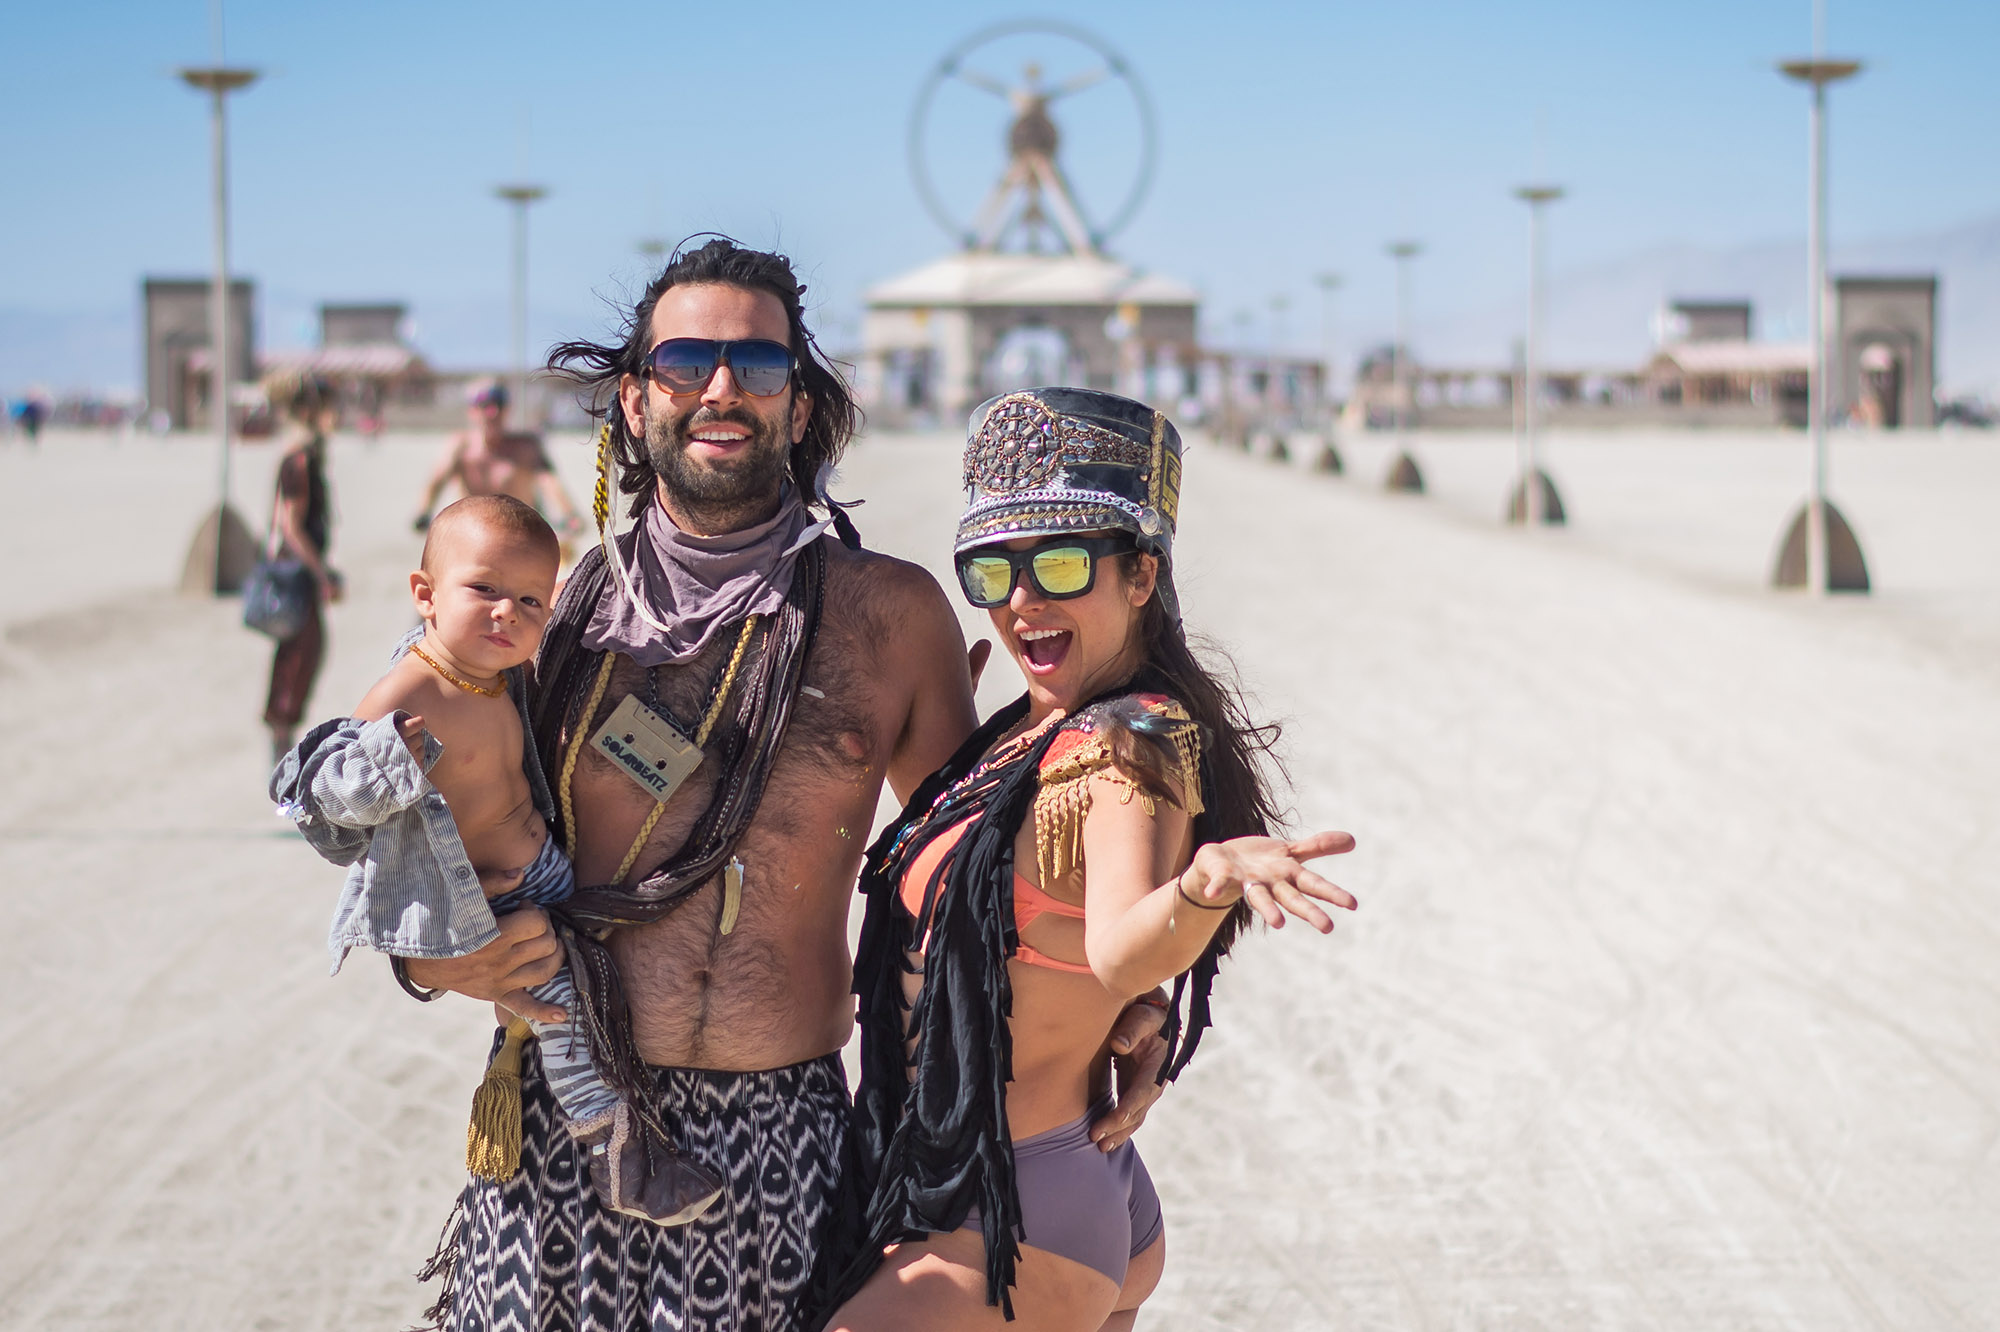 amie cunningham recommends Fucking At Burning Man